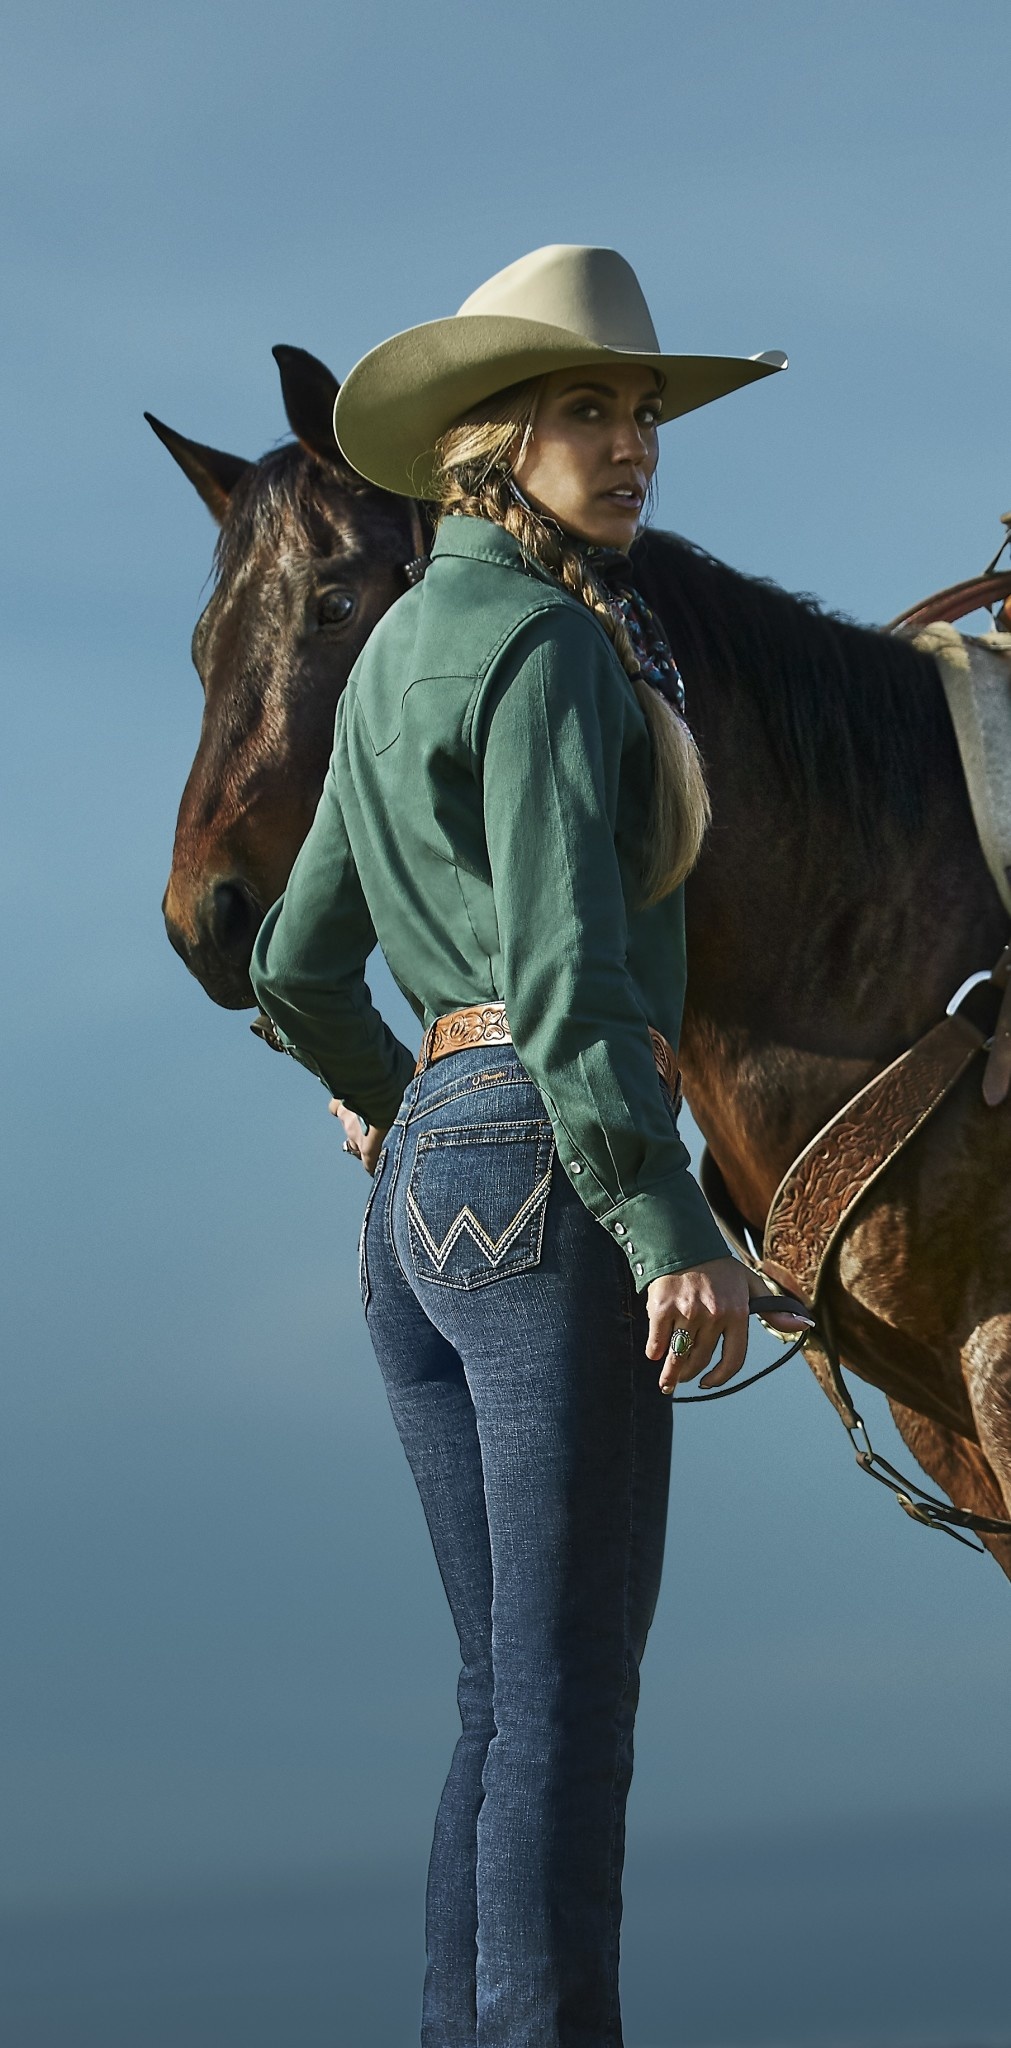 Turquoise Saddle Pads For Western Riders - COWGIRL Magazine